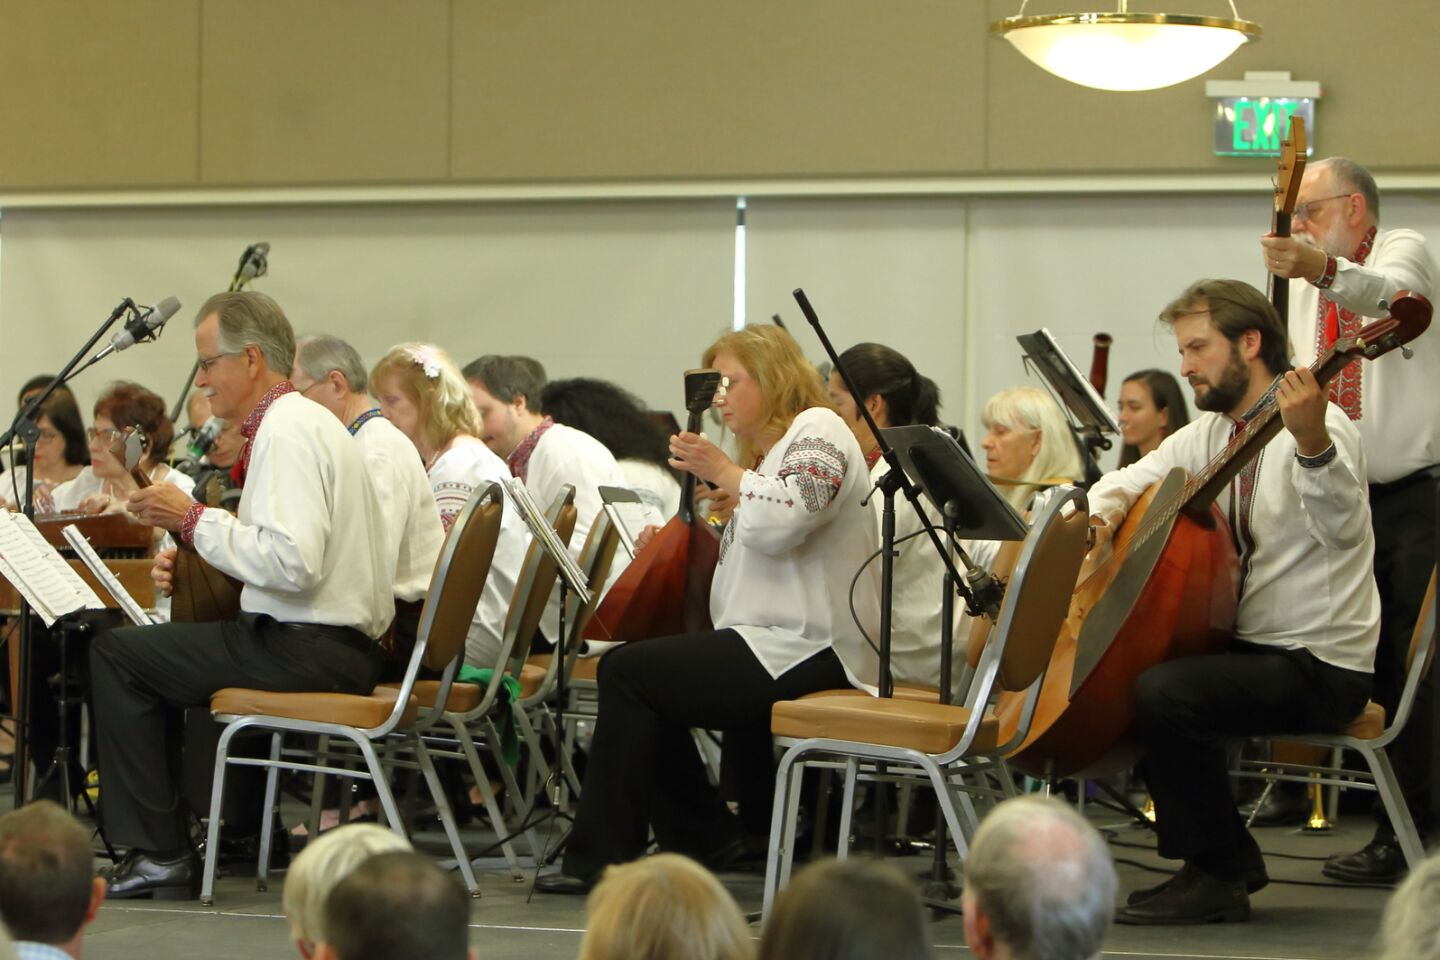 The 25th anniversary concert of the Los Angeles Balalaika Orchestra at the Encinitas Community Center